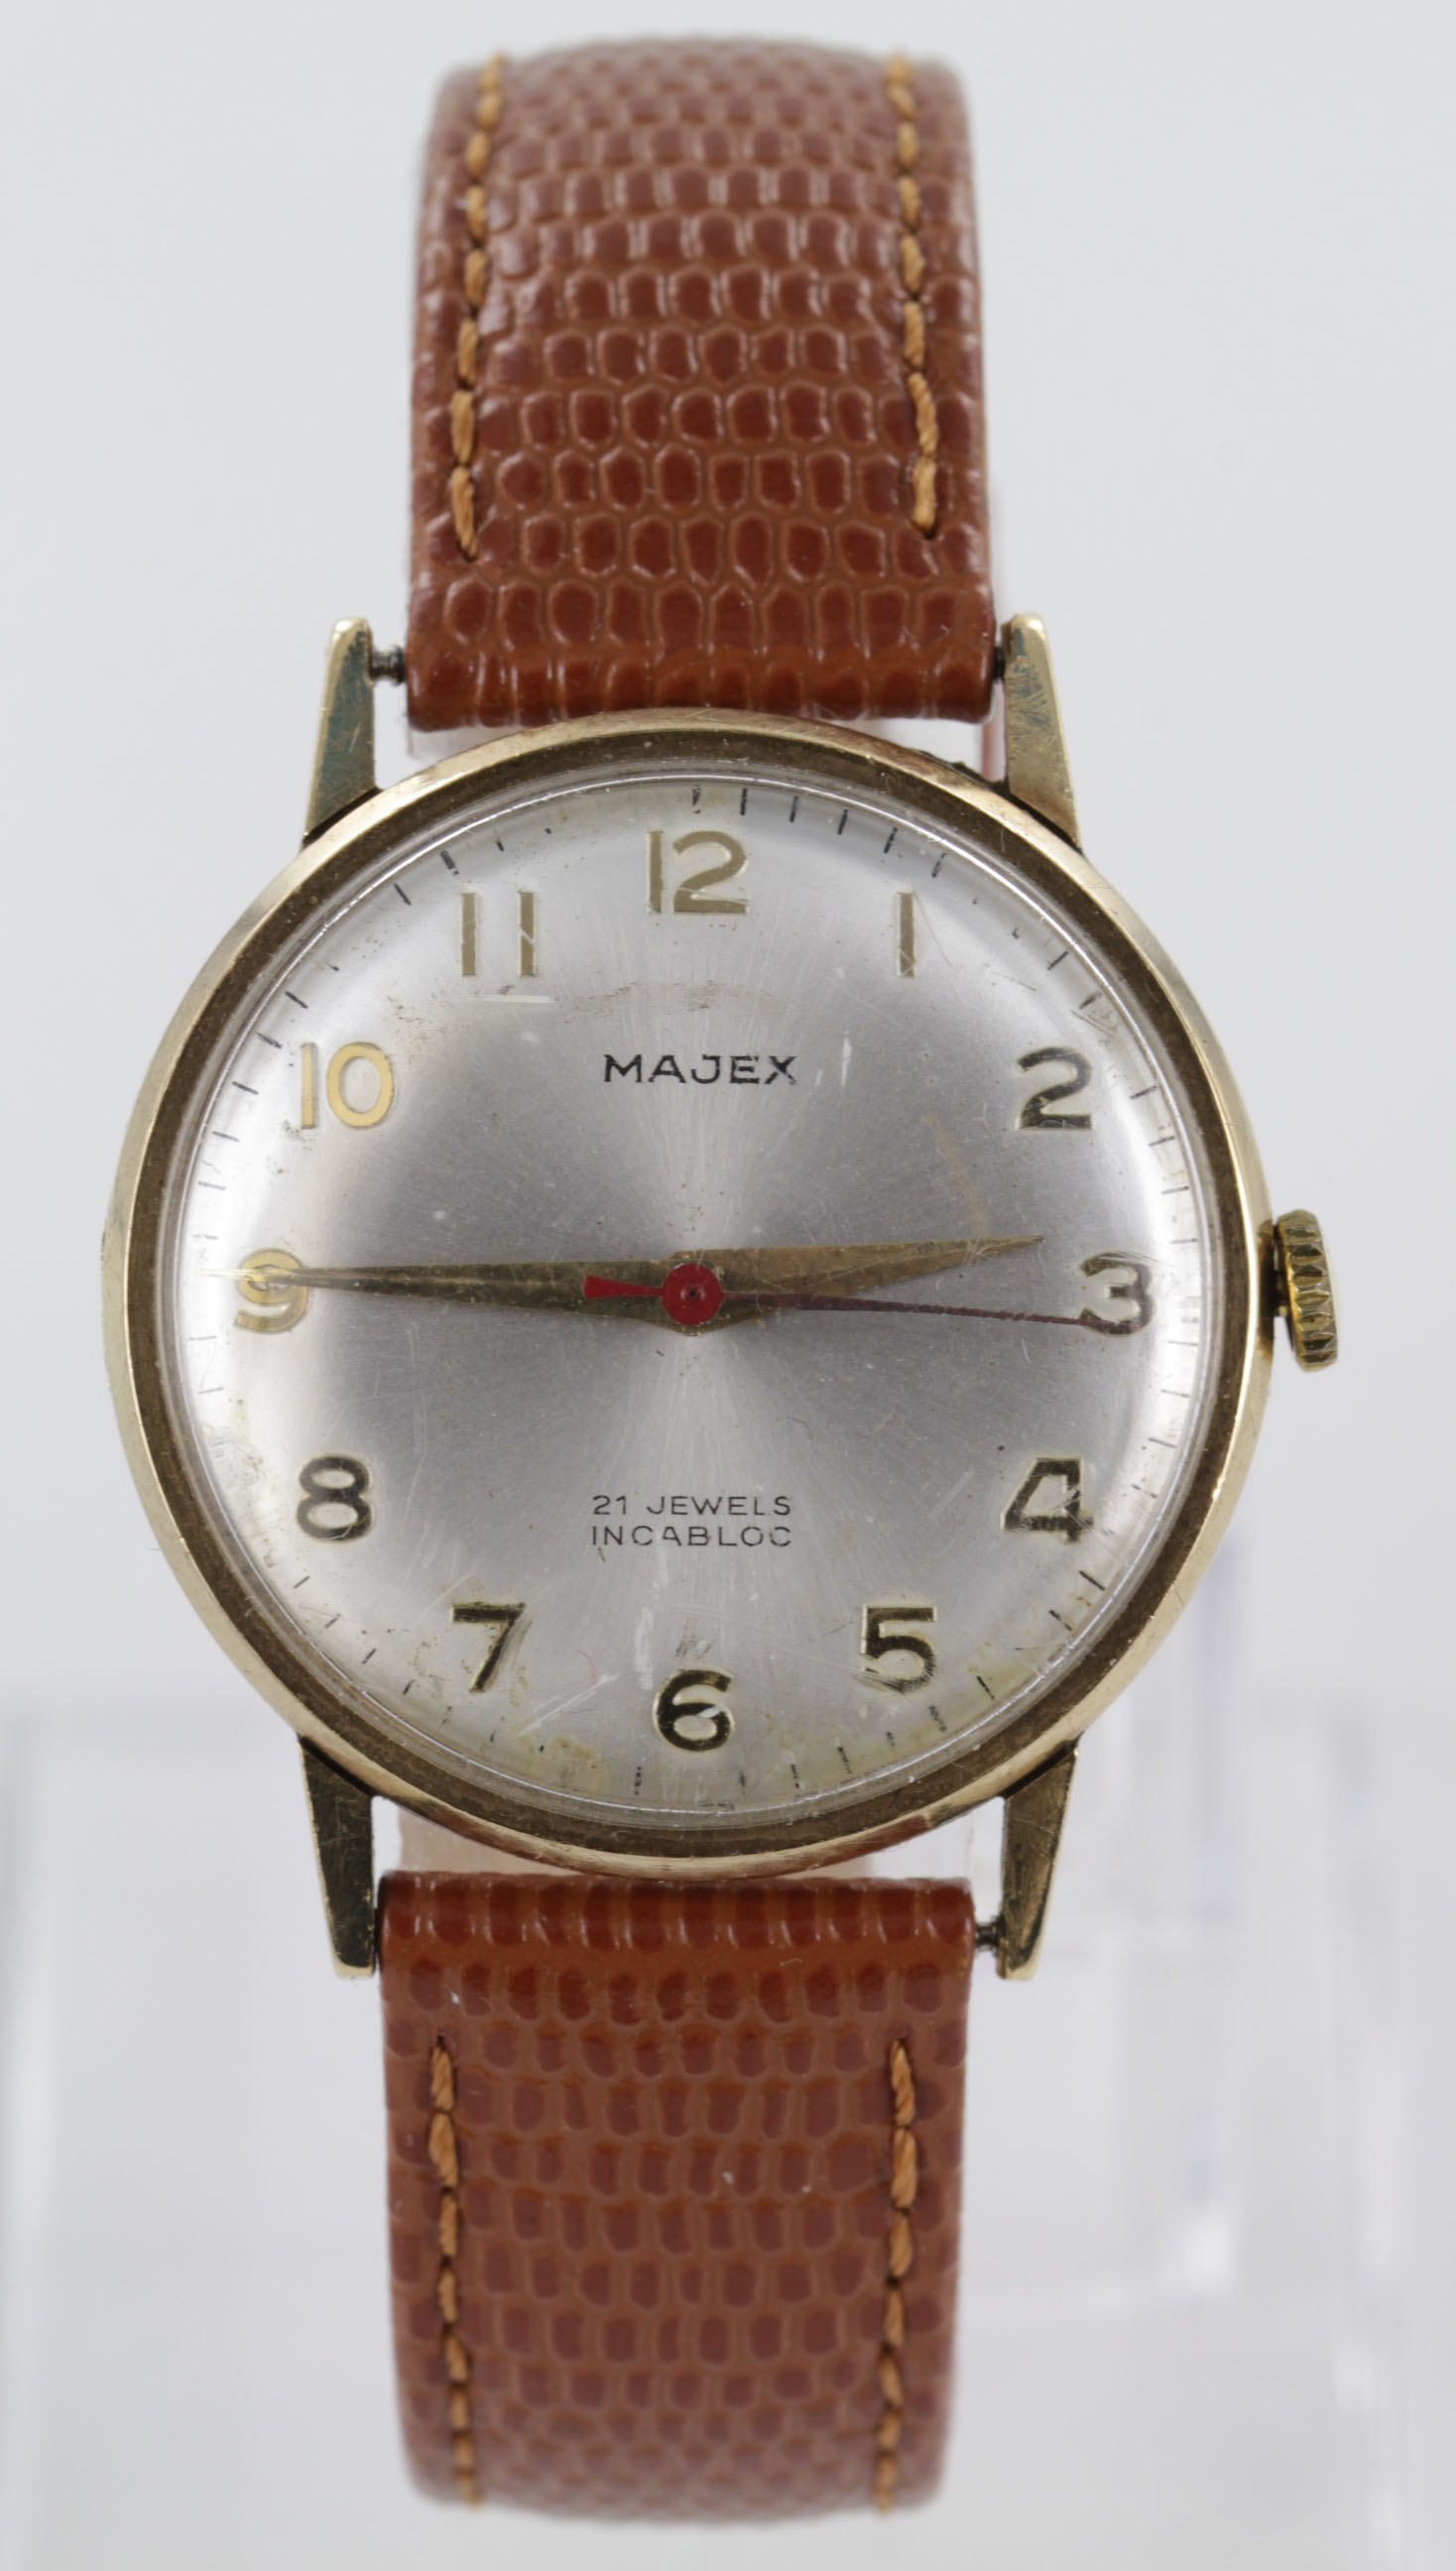 Gents 9ct cased wristwatch by Majex circa 1968, the silvered dial with Arabic numerals. Working when